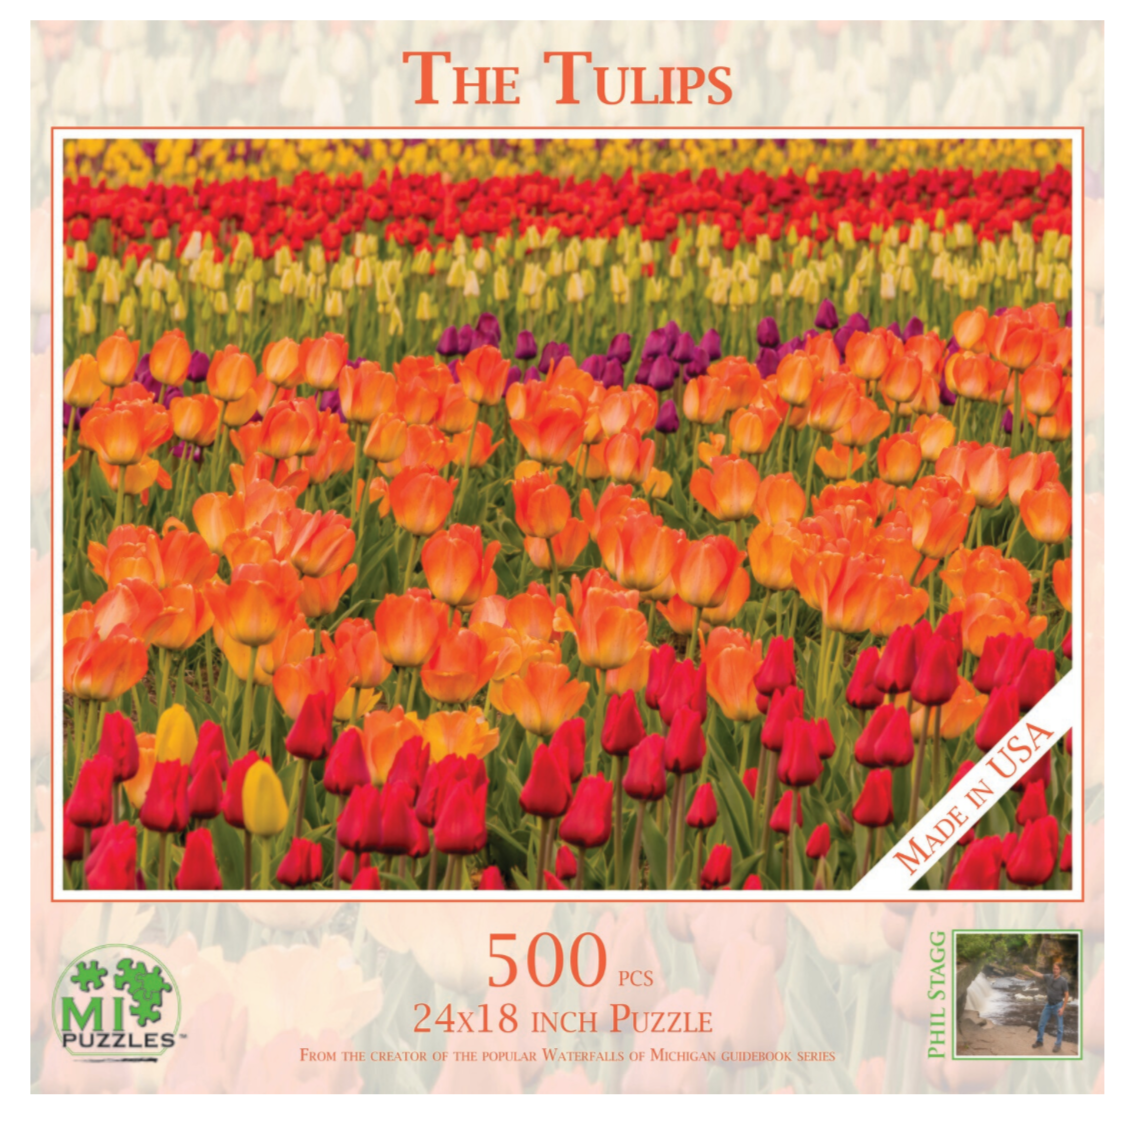 The Tulips 500 pc Jigsaw Puzzle